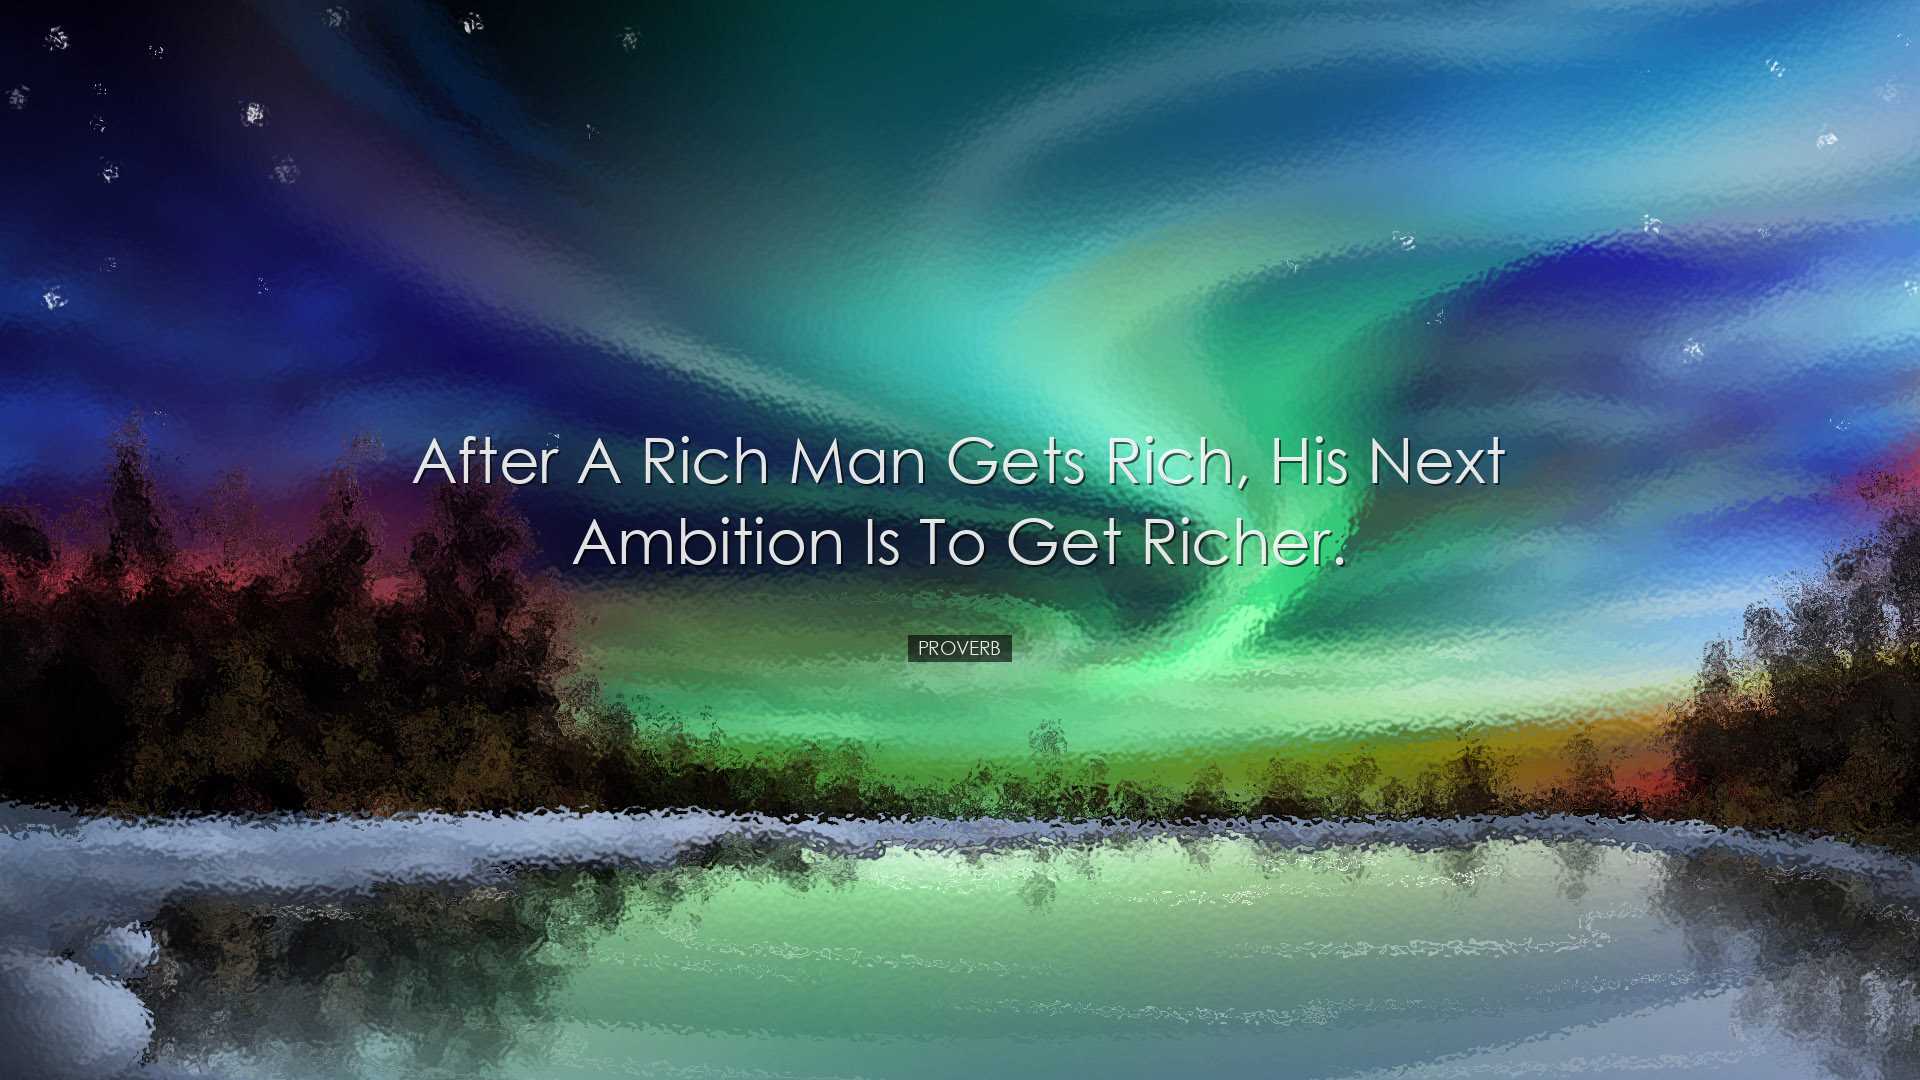 After a rich man gets rich, his next ambition is to get richer. -